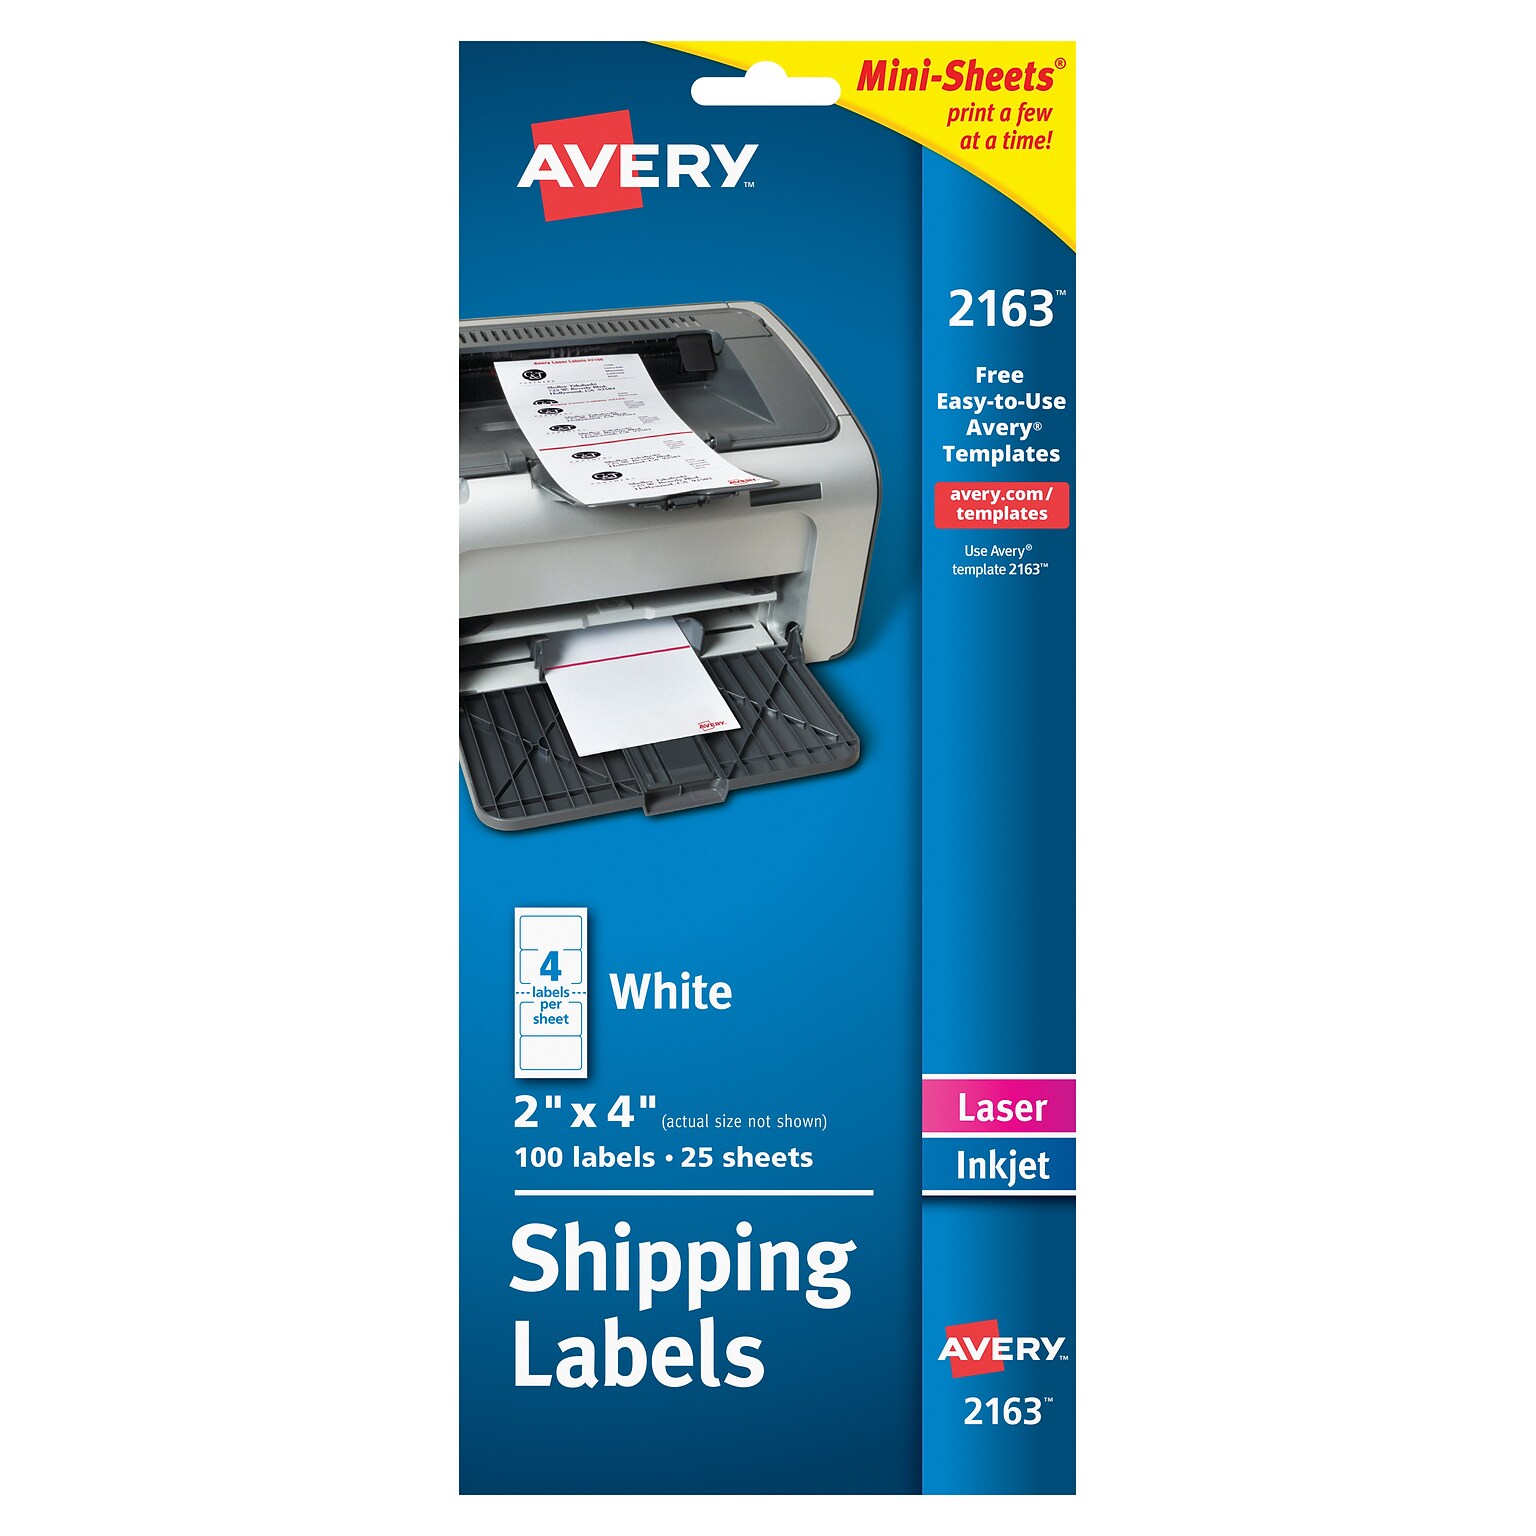 Avery Mini-Sheets Laser/Inkjet Shipping Labels, 2 x 4, White, 4 Labels/Sheet, 25 Sheets/Pack (2163)